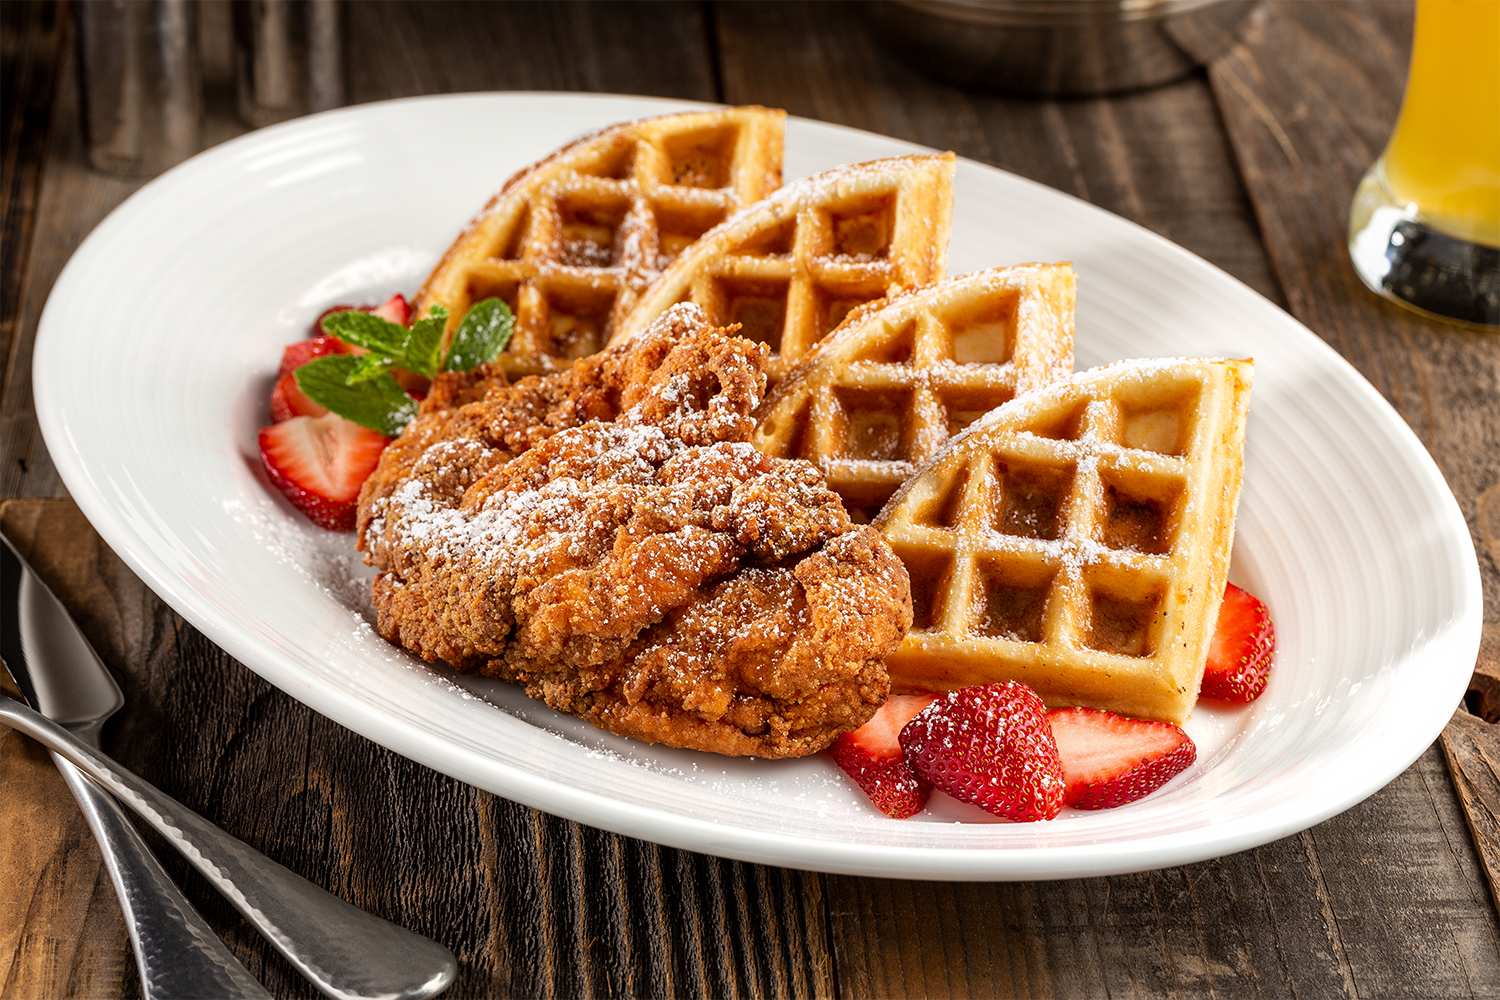 The chicken and waffles with strawberries at Nellie's Southern Kitchen in Las Vegas, Nevada, at the MGM Grand